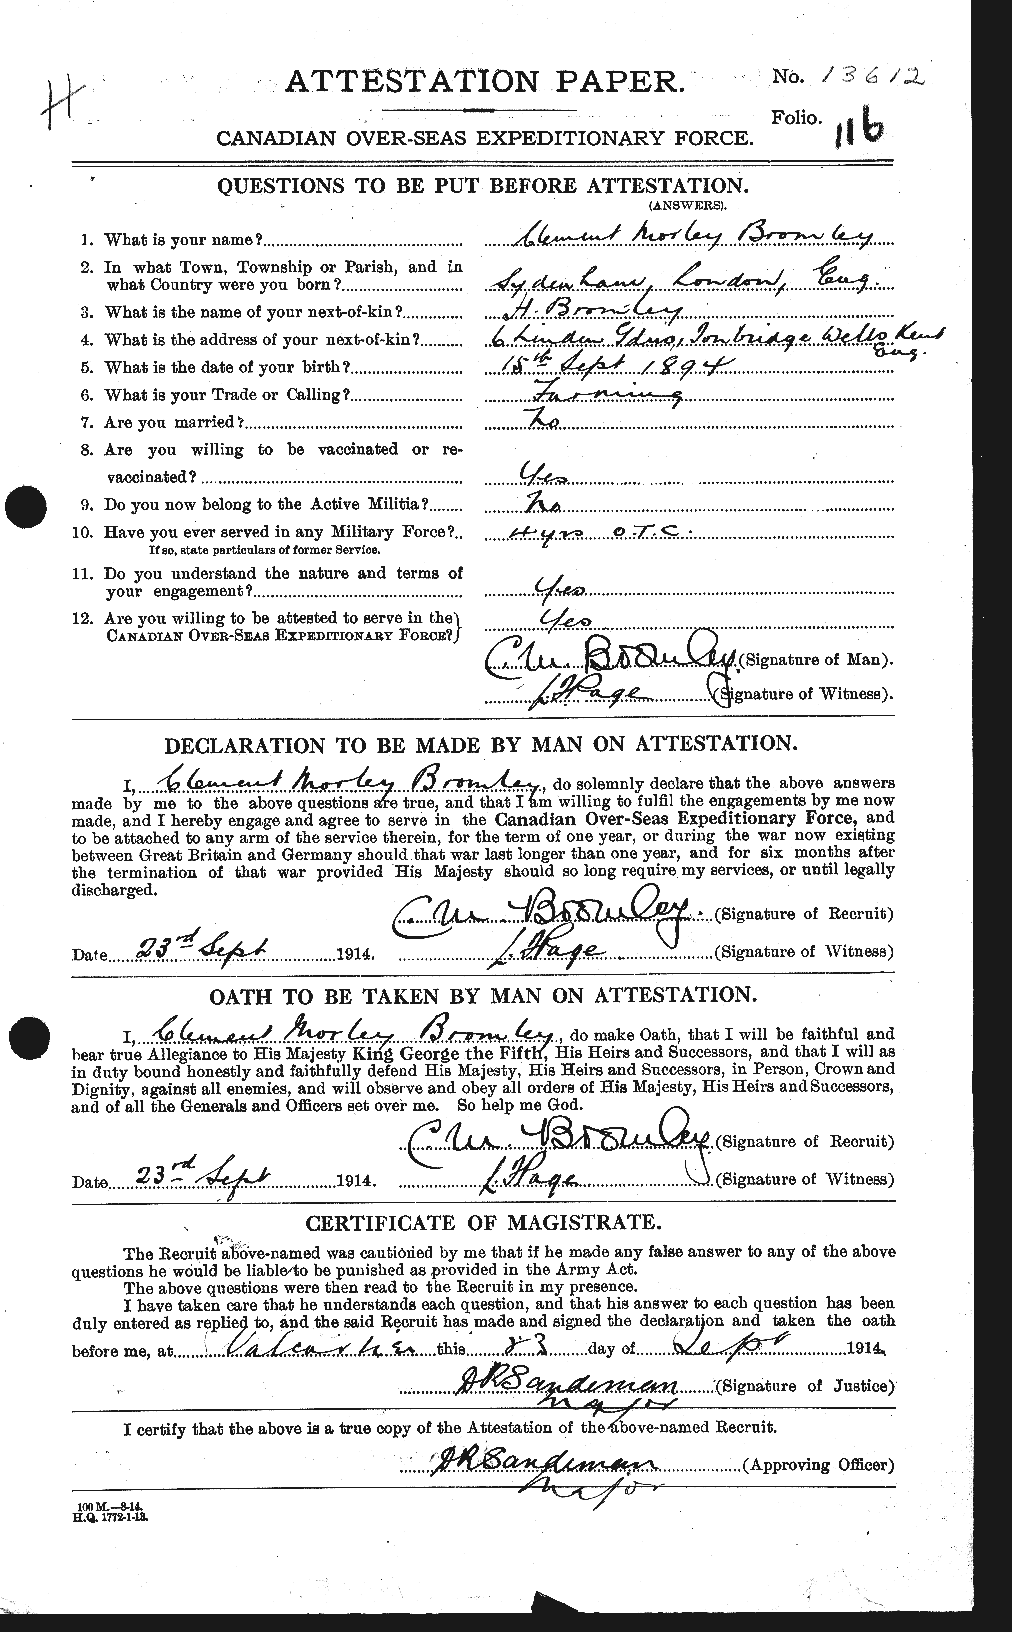 Personnel Records of the First World War - CEF 262156a